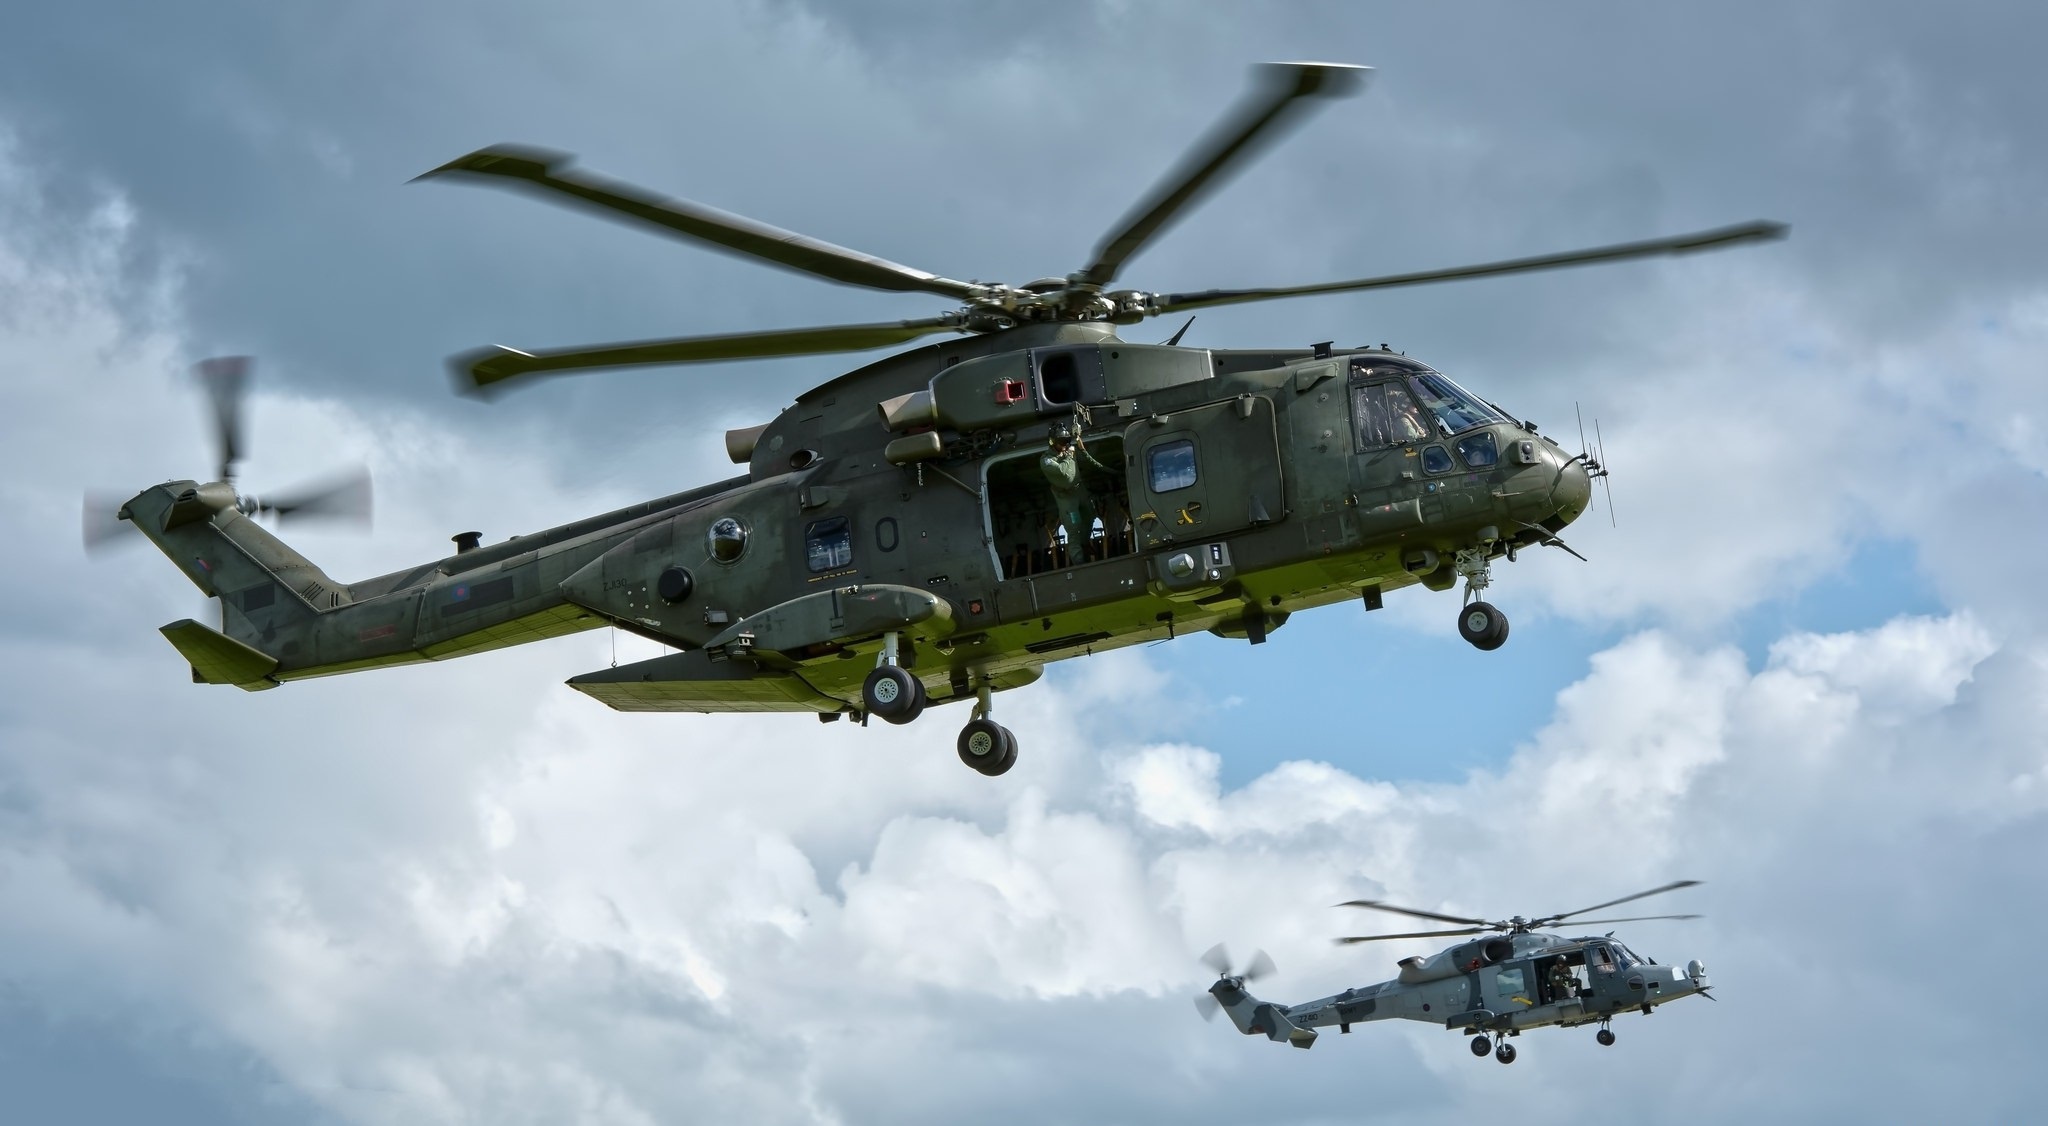 AgustaWestland AW101 HD Wallpapers and Backgrounds 2050x1130